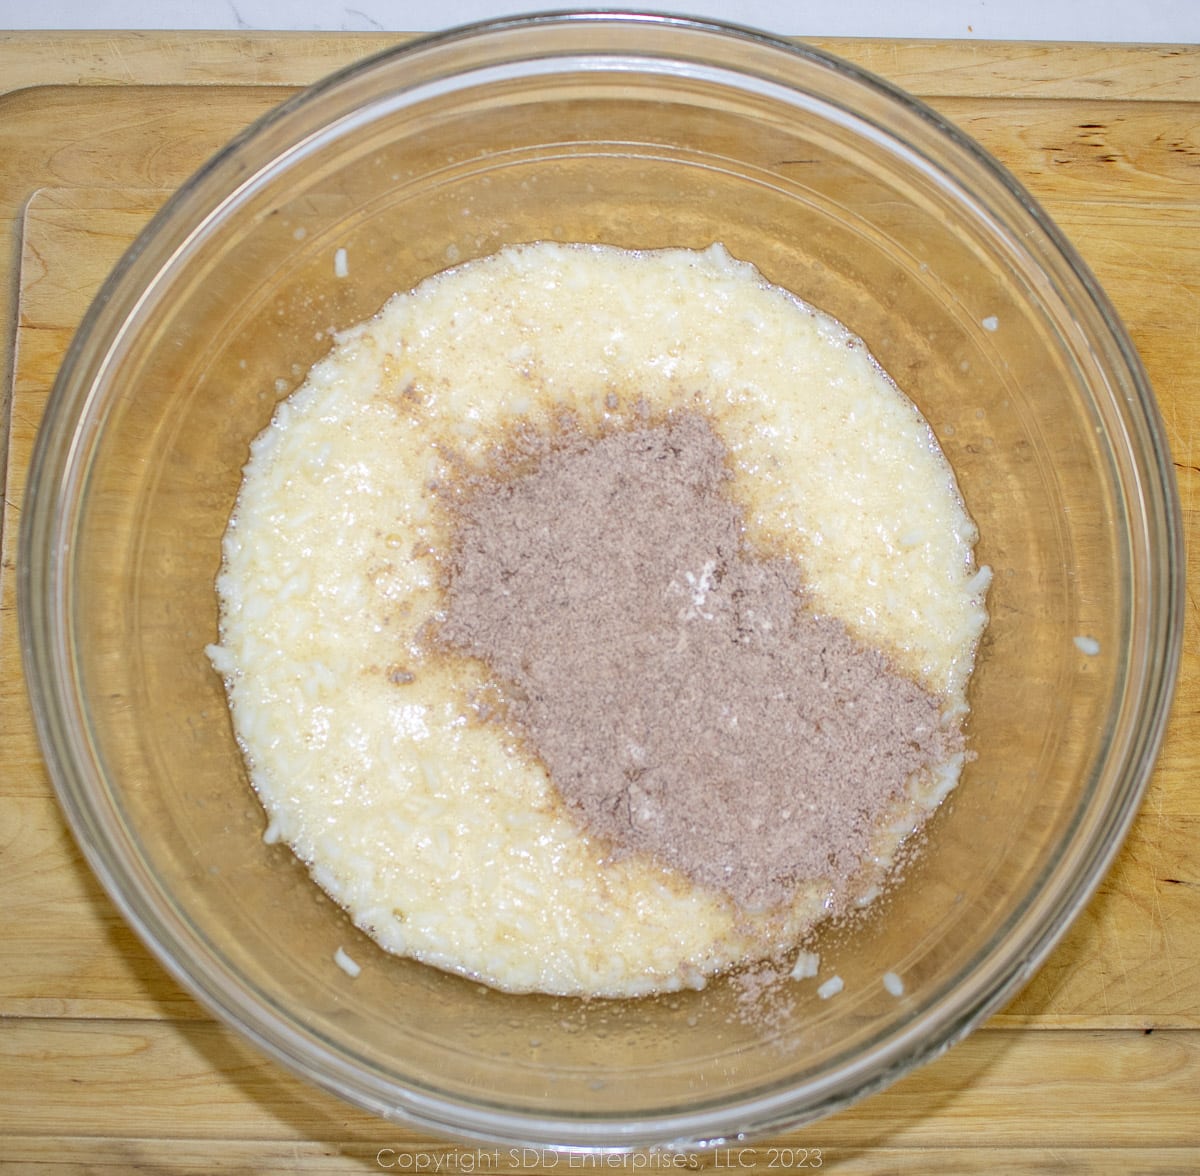 spices added to an egg-rice mixture in a glass bowl